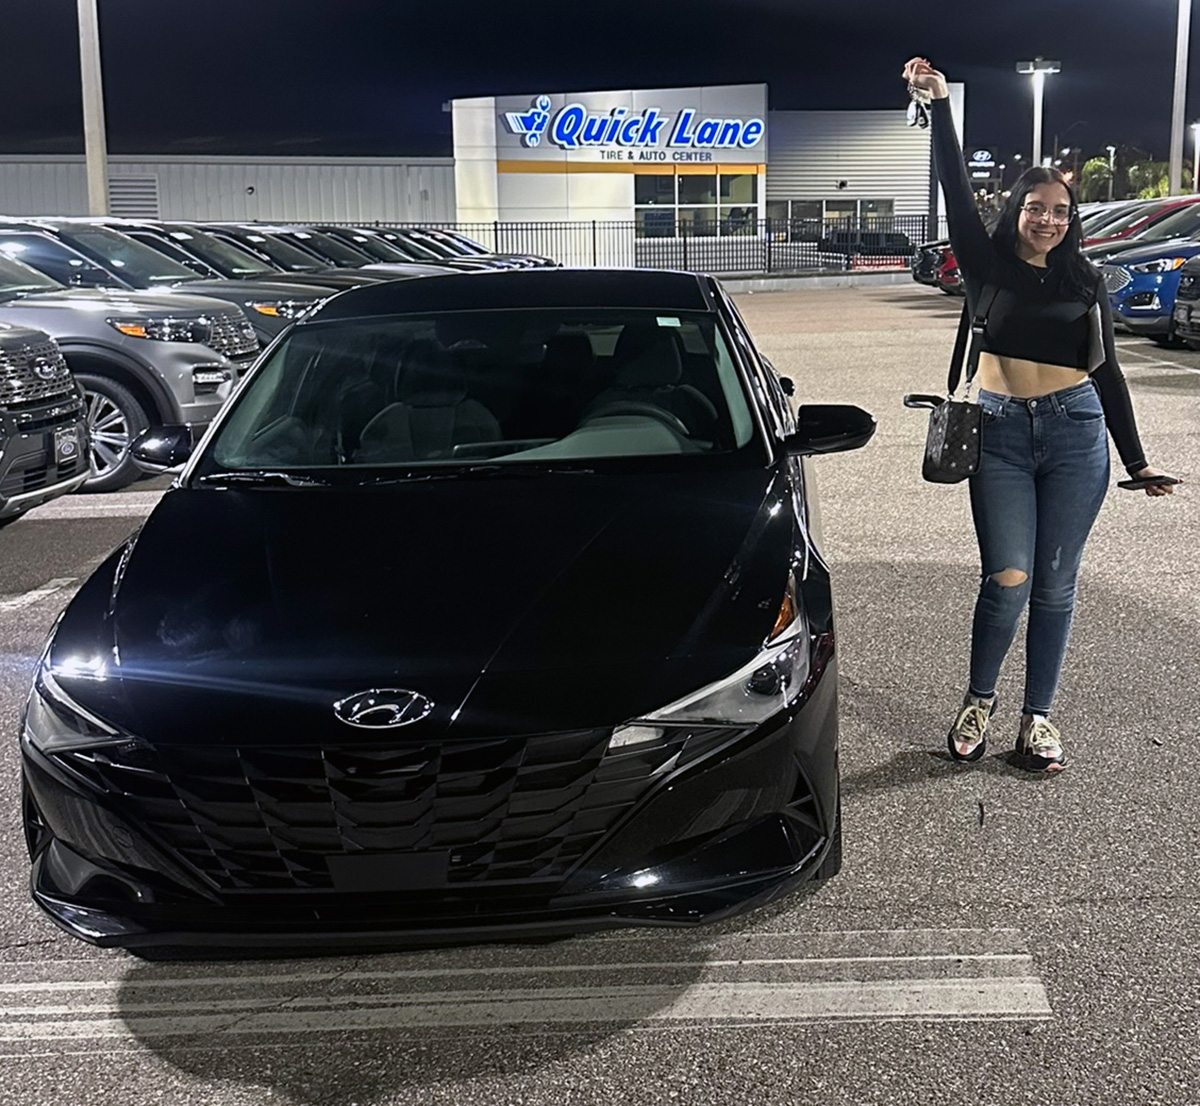 Paola Pereira knew just where to go to get a #GreatDeal on her #HyundaiElantra... #LakelandAutomall of course & salesperson #JonathanDiaz made sure #GreatService meant buying was #Fast, #Fun & #Easy. #Enjoy Paola & #ThankYou for choosing us - we're here for you! #NewCar #Hyundai